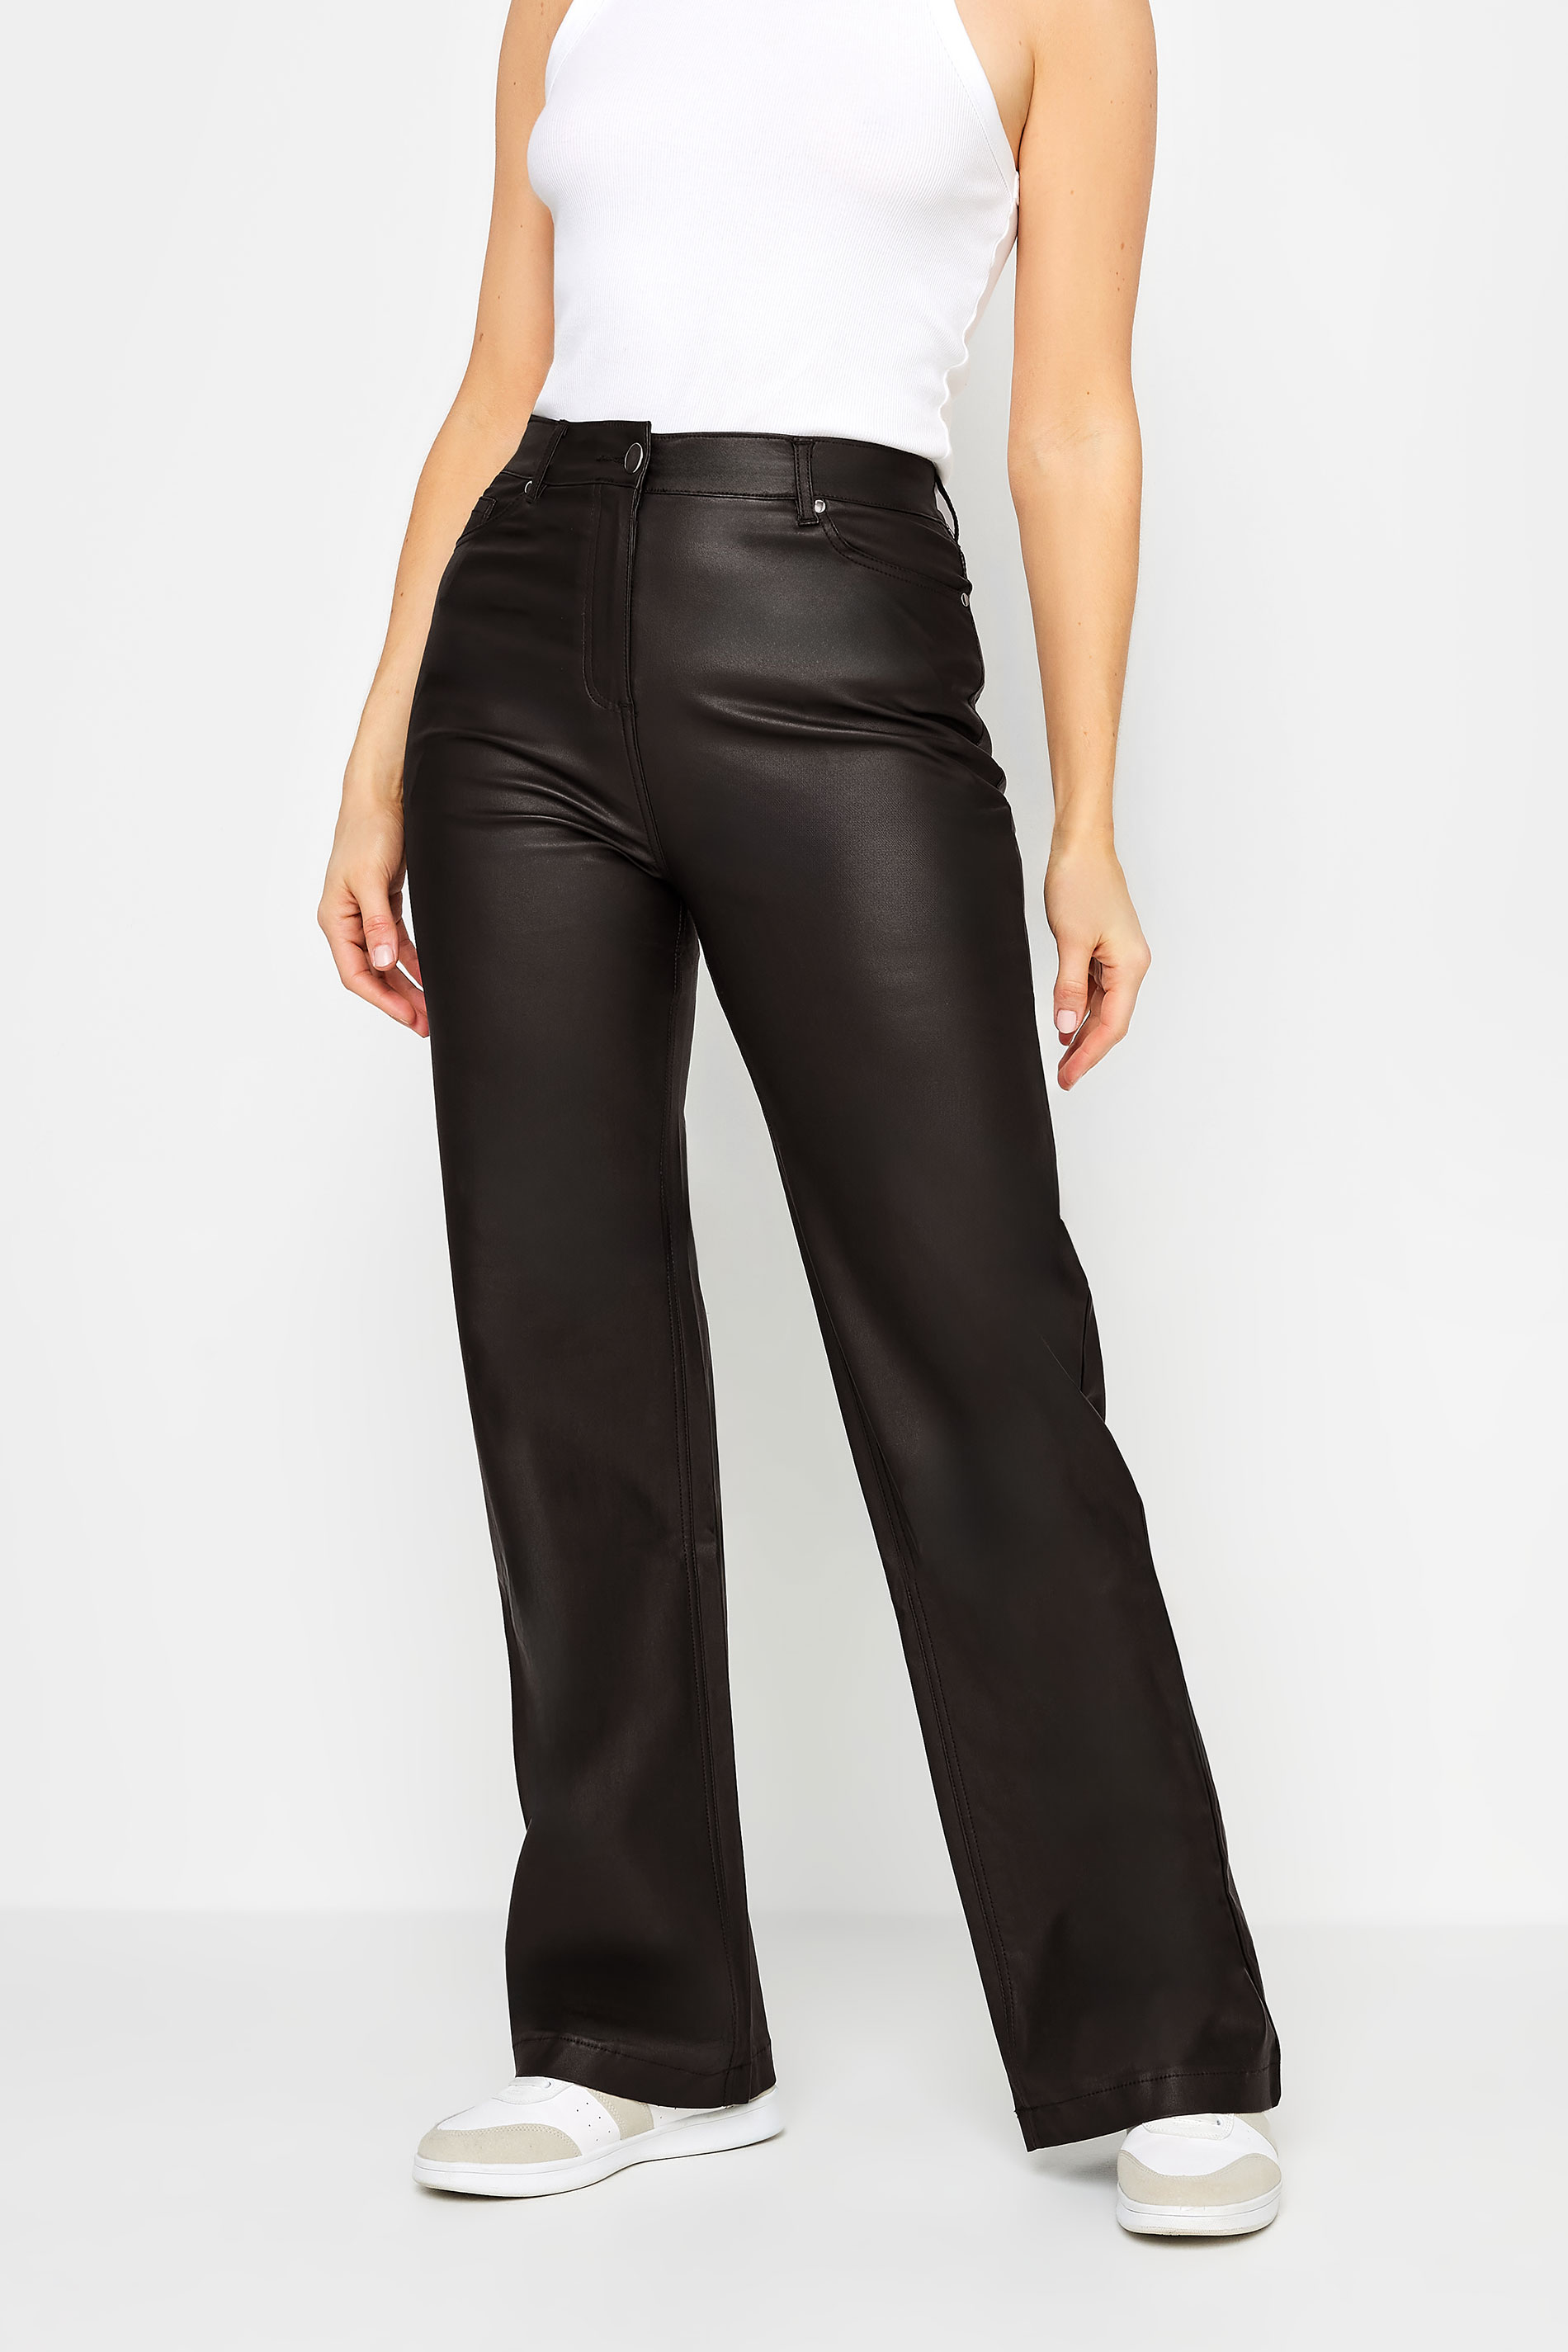 LTS Tall Black Faux Leather Wide Leg Trousers | Long Tall Sally  3